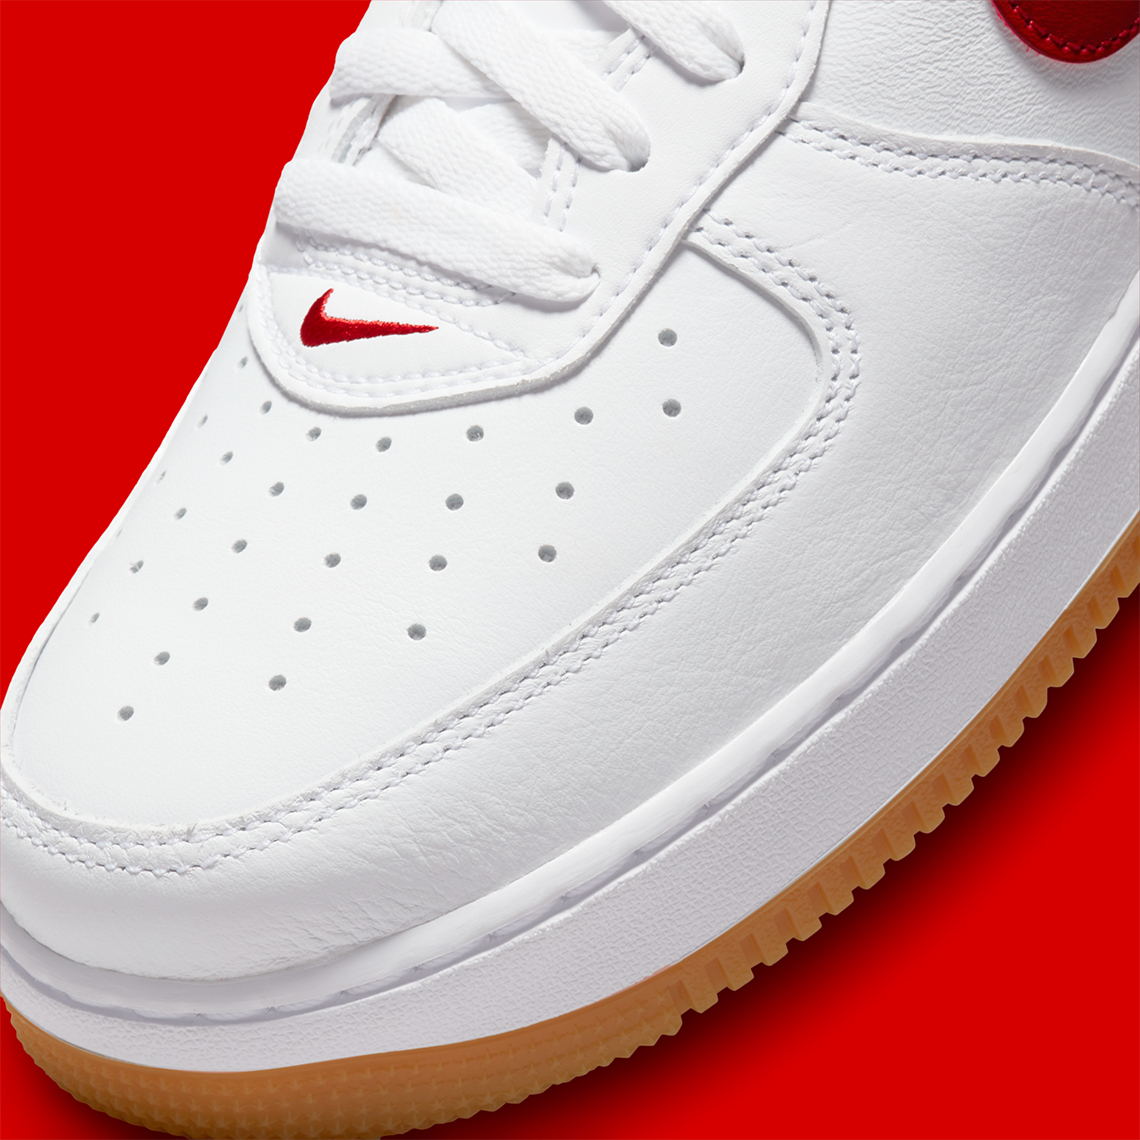 Available Now // Air Force 1 Low “82” Channels Two OG Air Jordan 1